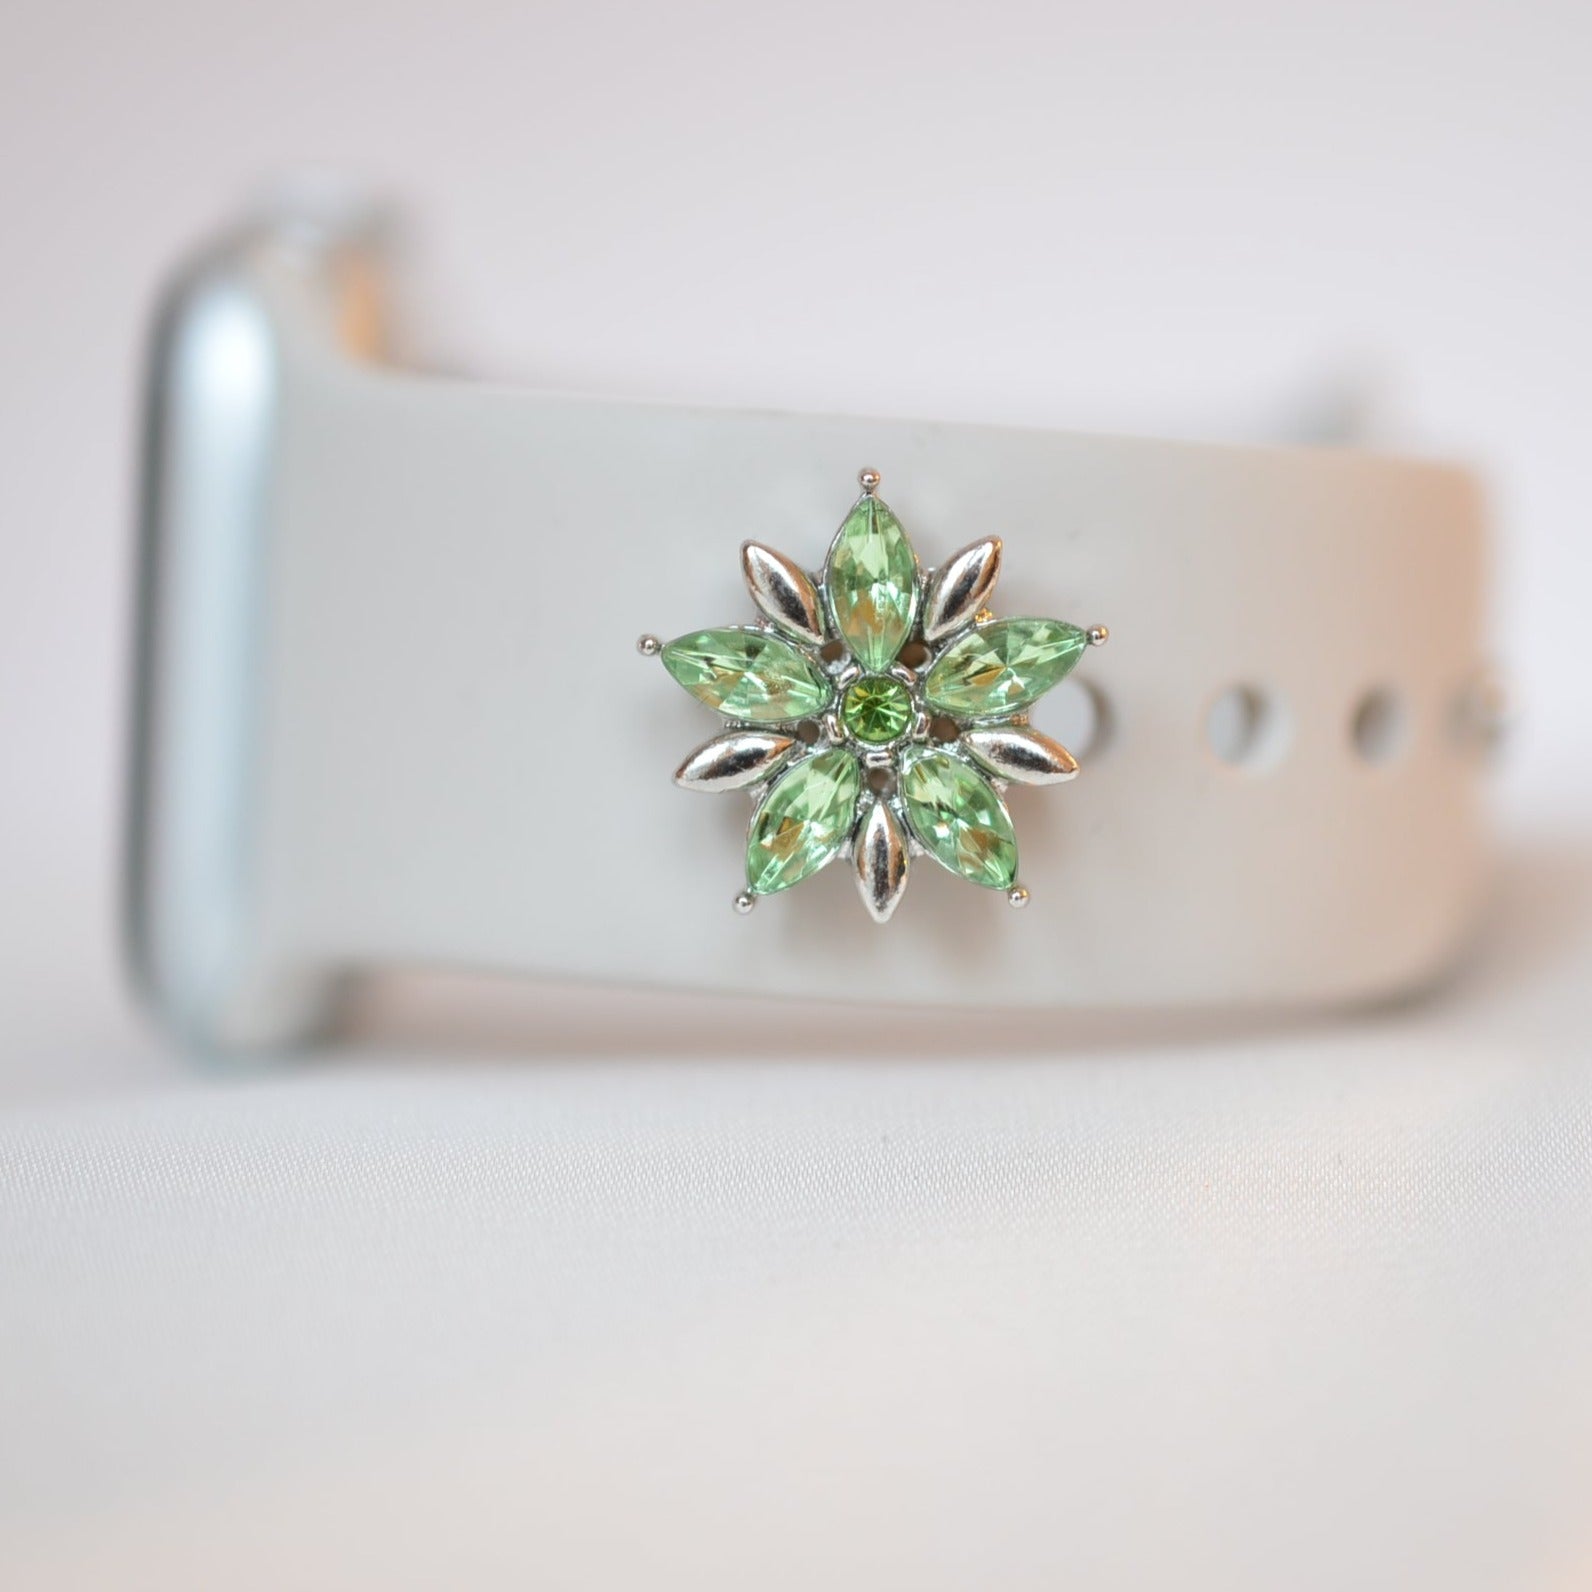 Green Flower Charm for Belts, Bags and Watch Bands